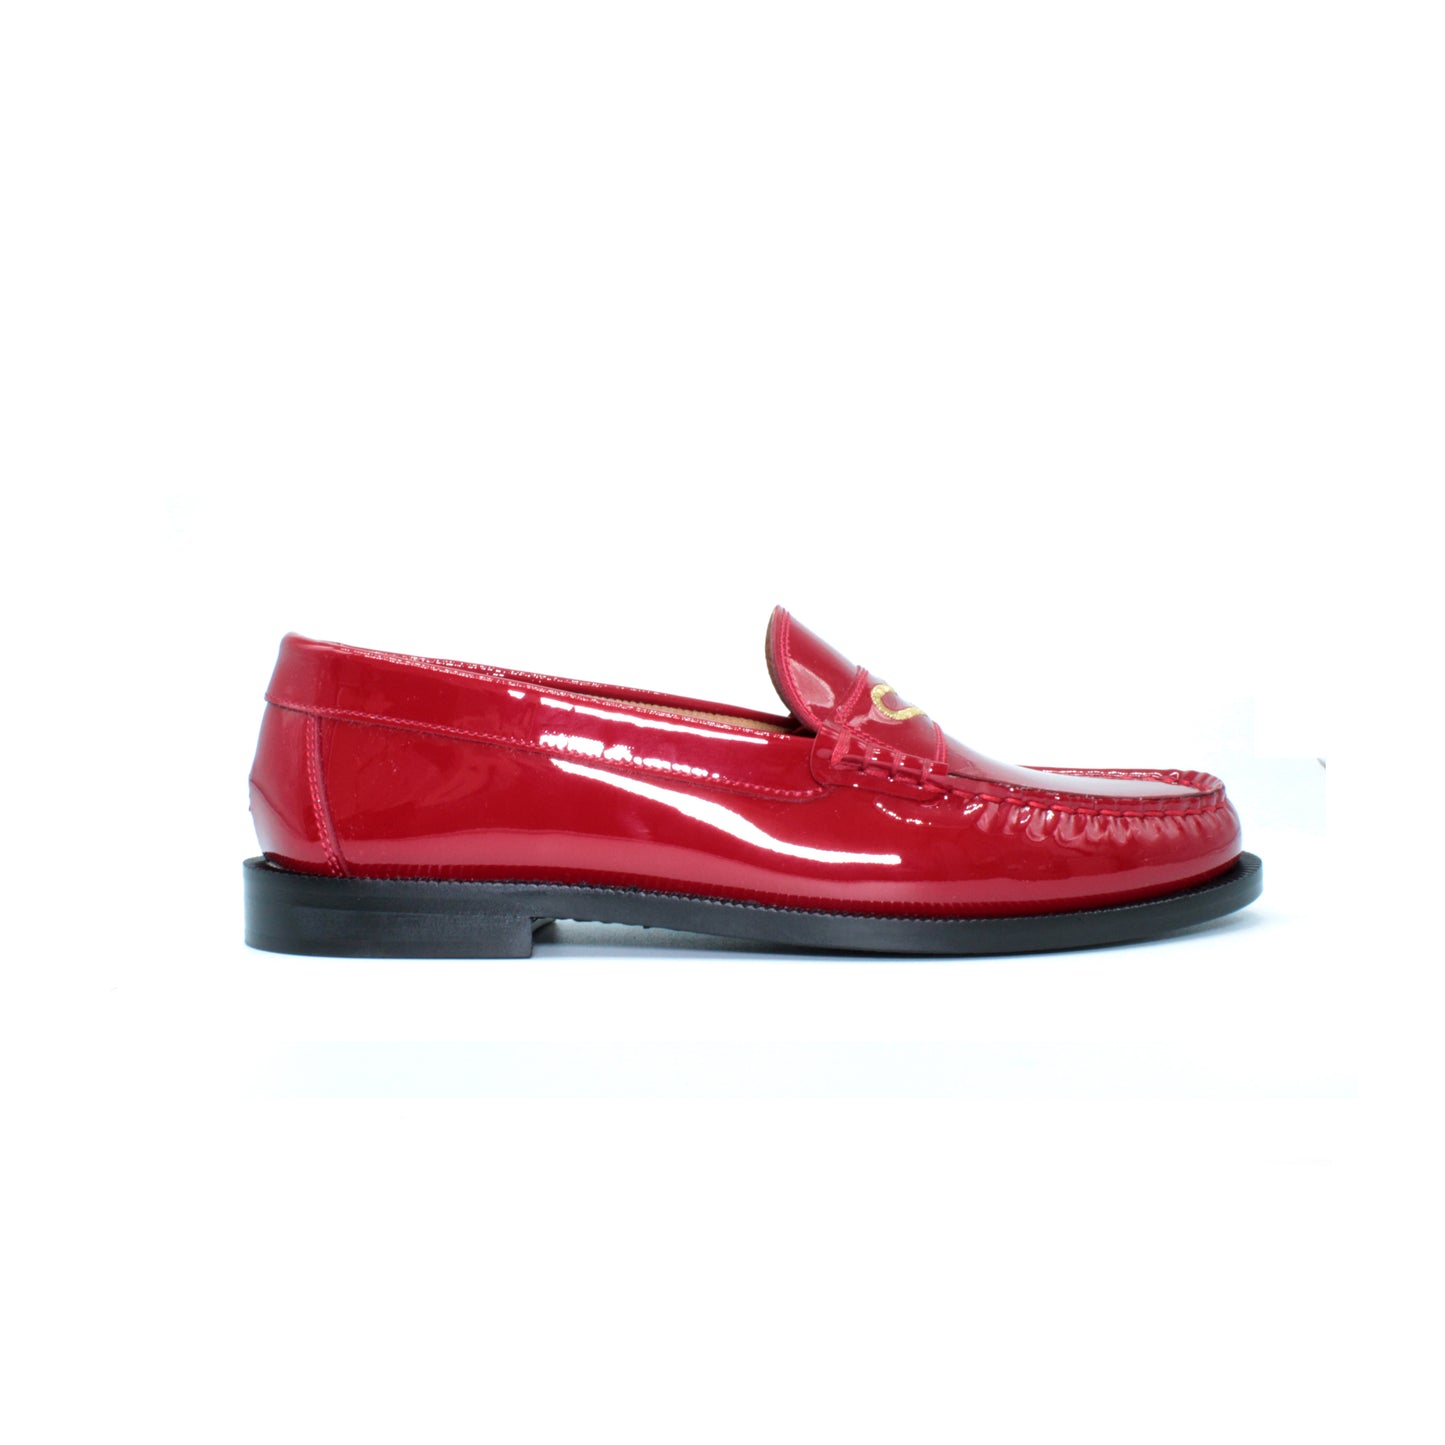 Merlot-colored patent moccasin